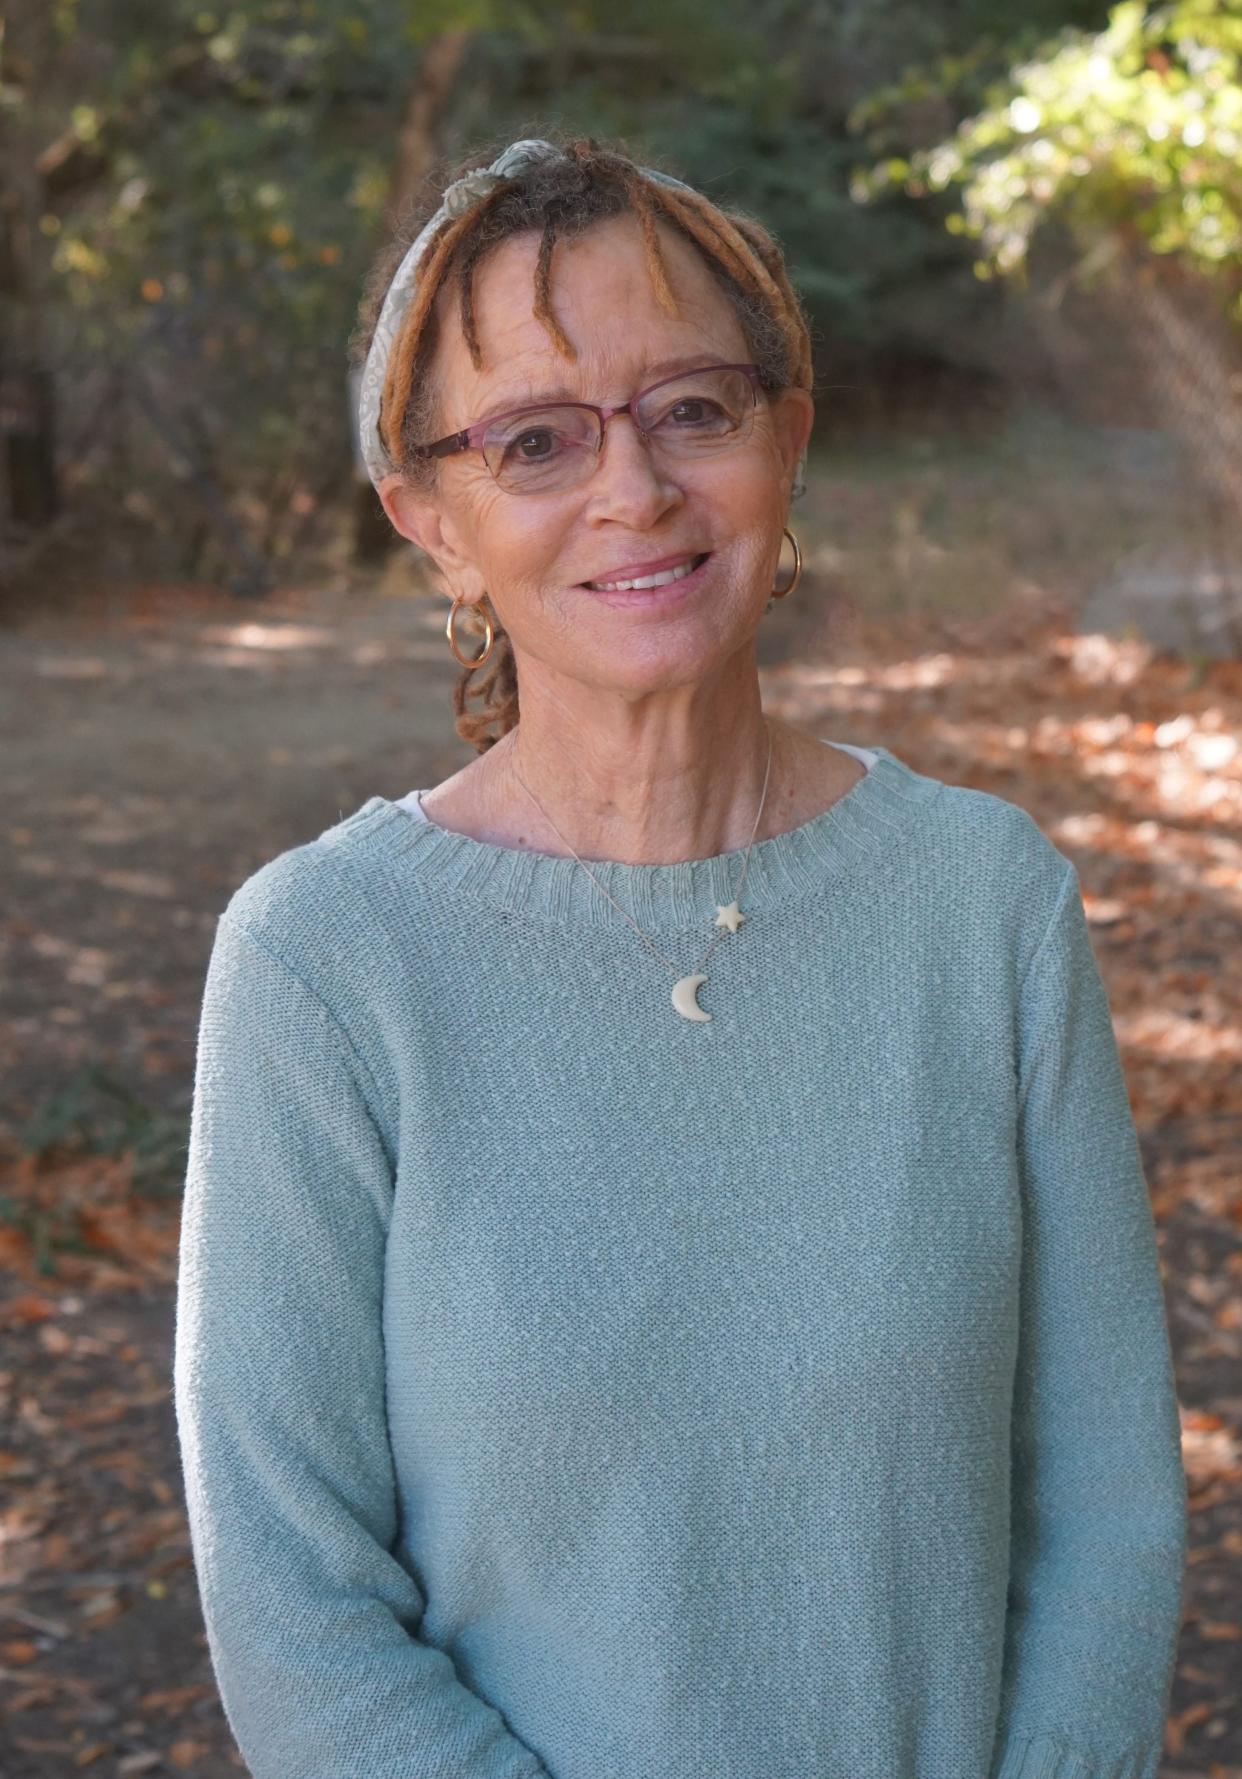 Author Anne Lamott's sold-out appearance at Columbus College of Art & Design can be watched April 24 via livestream. Registration is required.